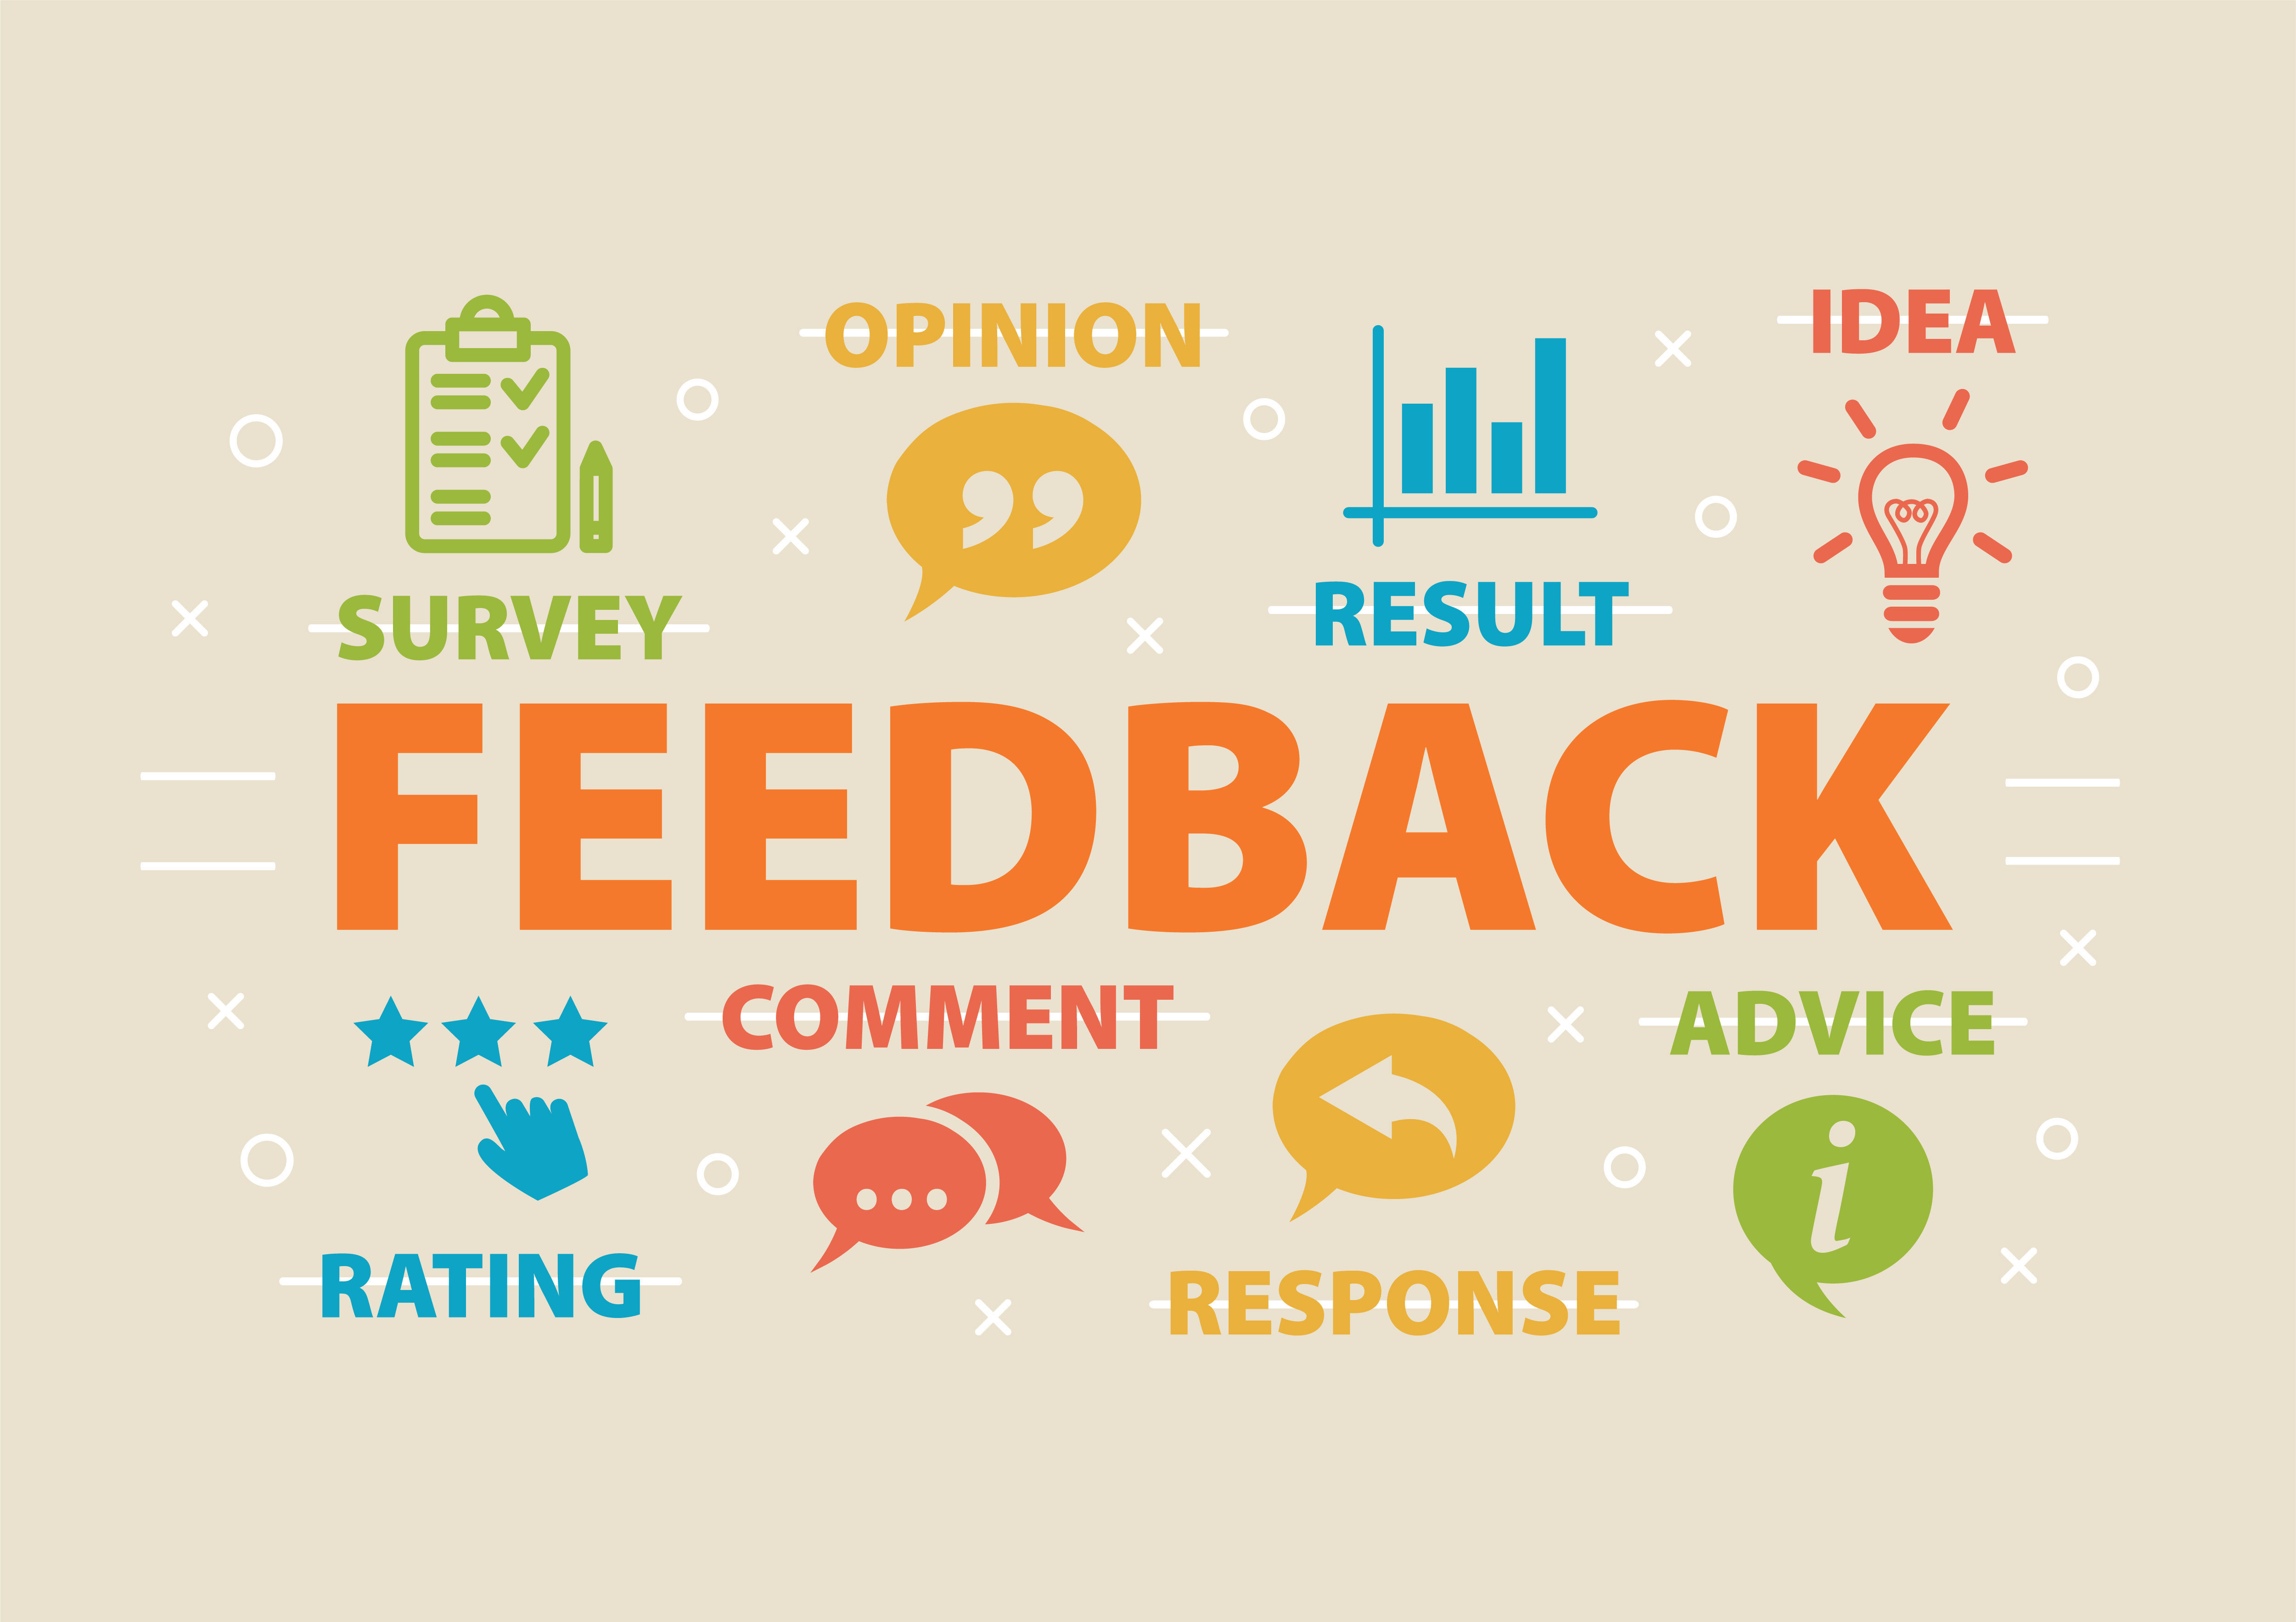 What do we do with customer feedback?